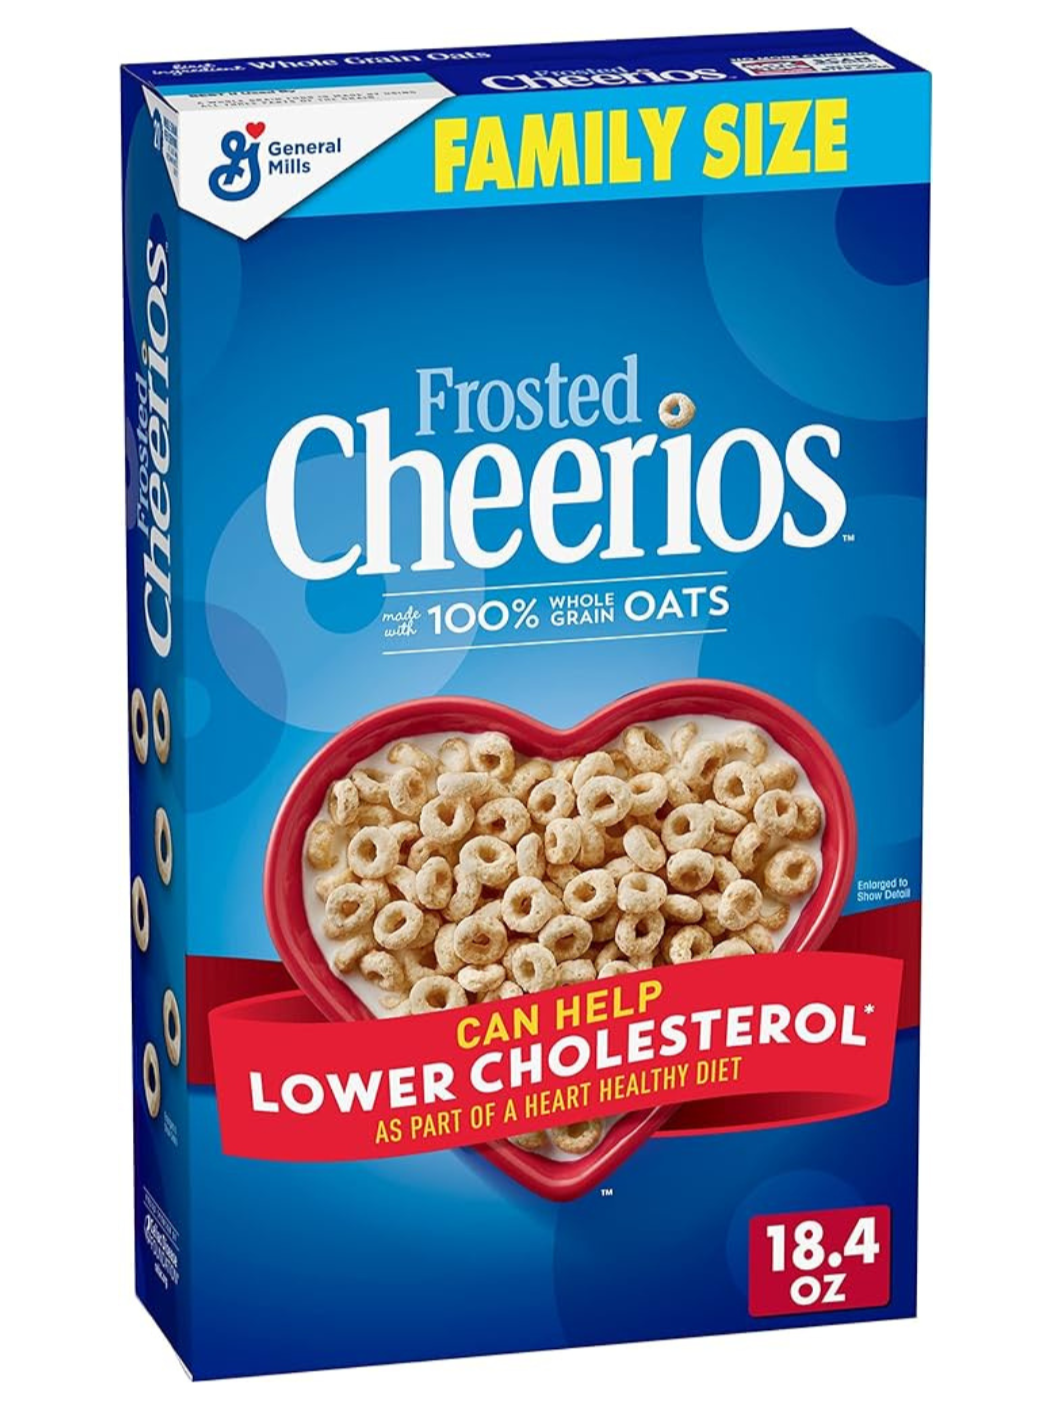 Frosted Cheerios, Heart Healthy Cereal, Family Size, 18.4 OZ